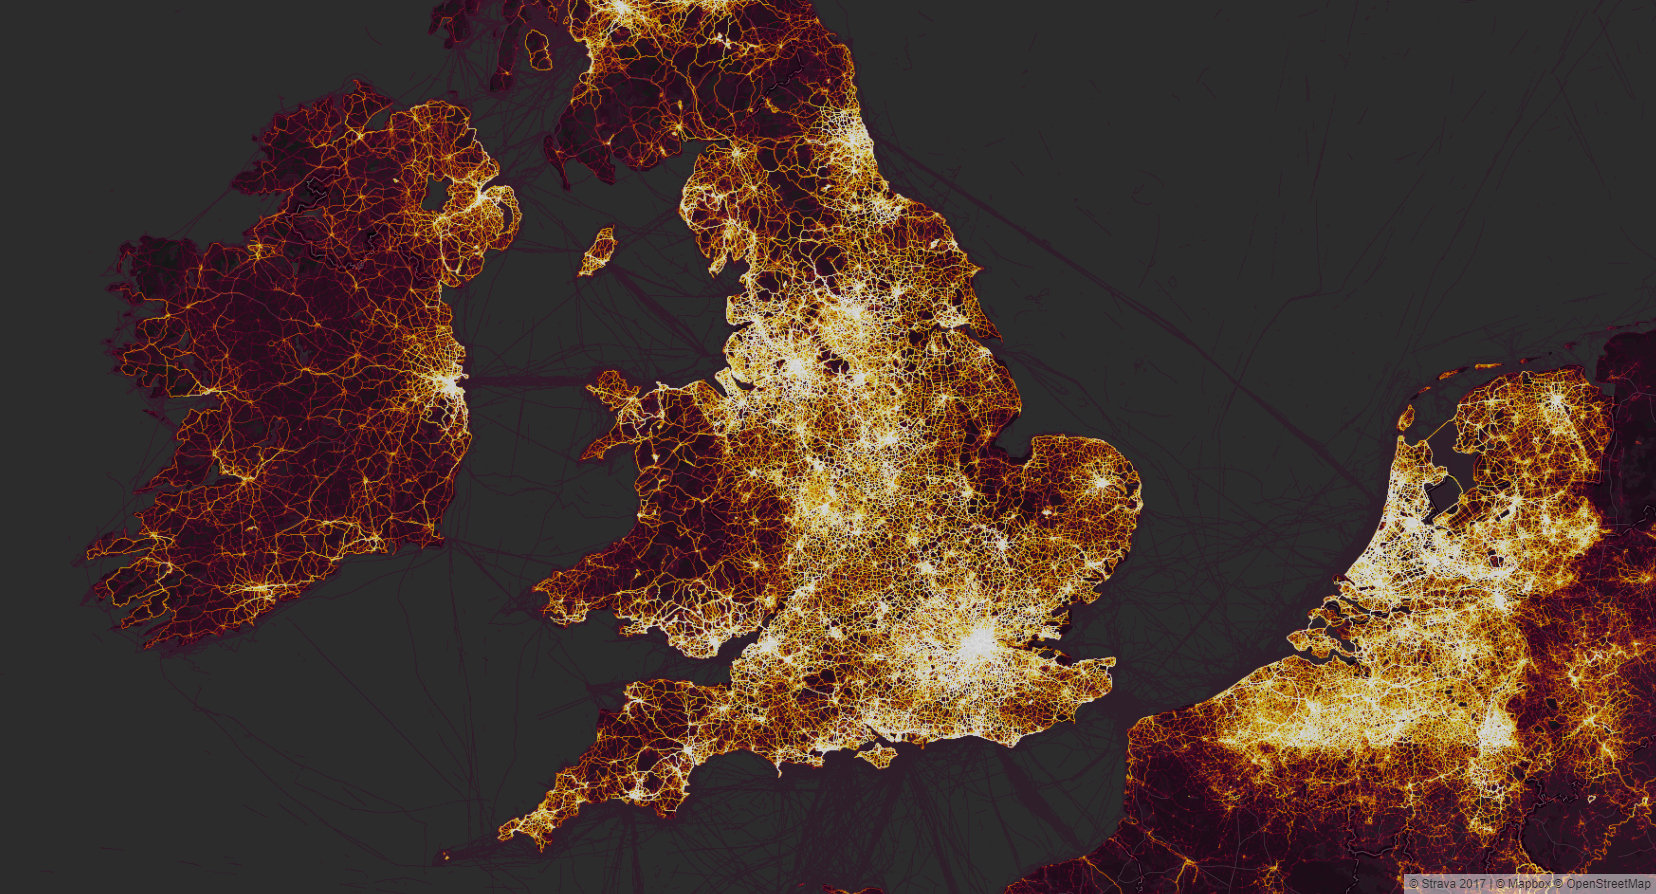 A Slice of the UK from the Global Heatmap.